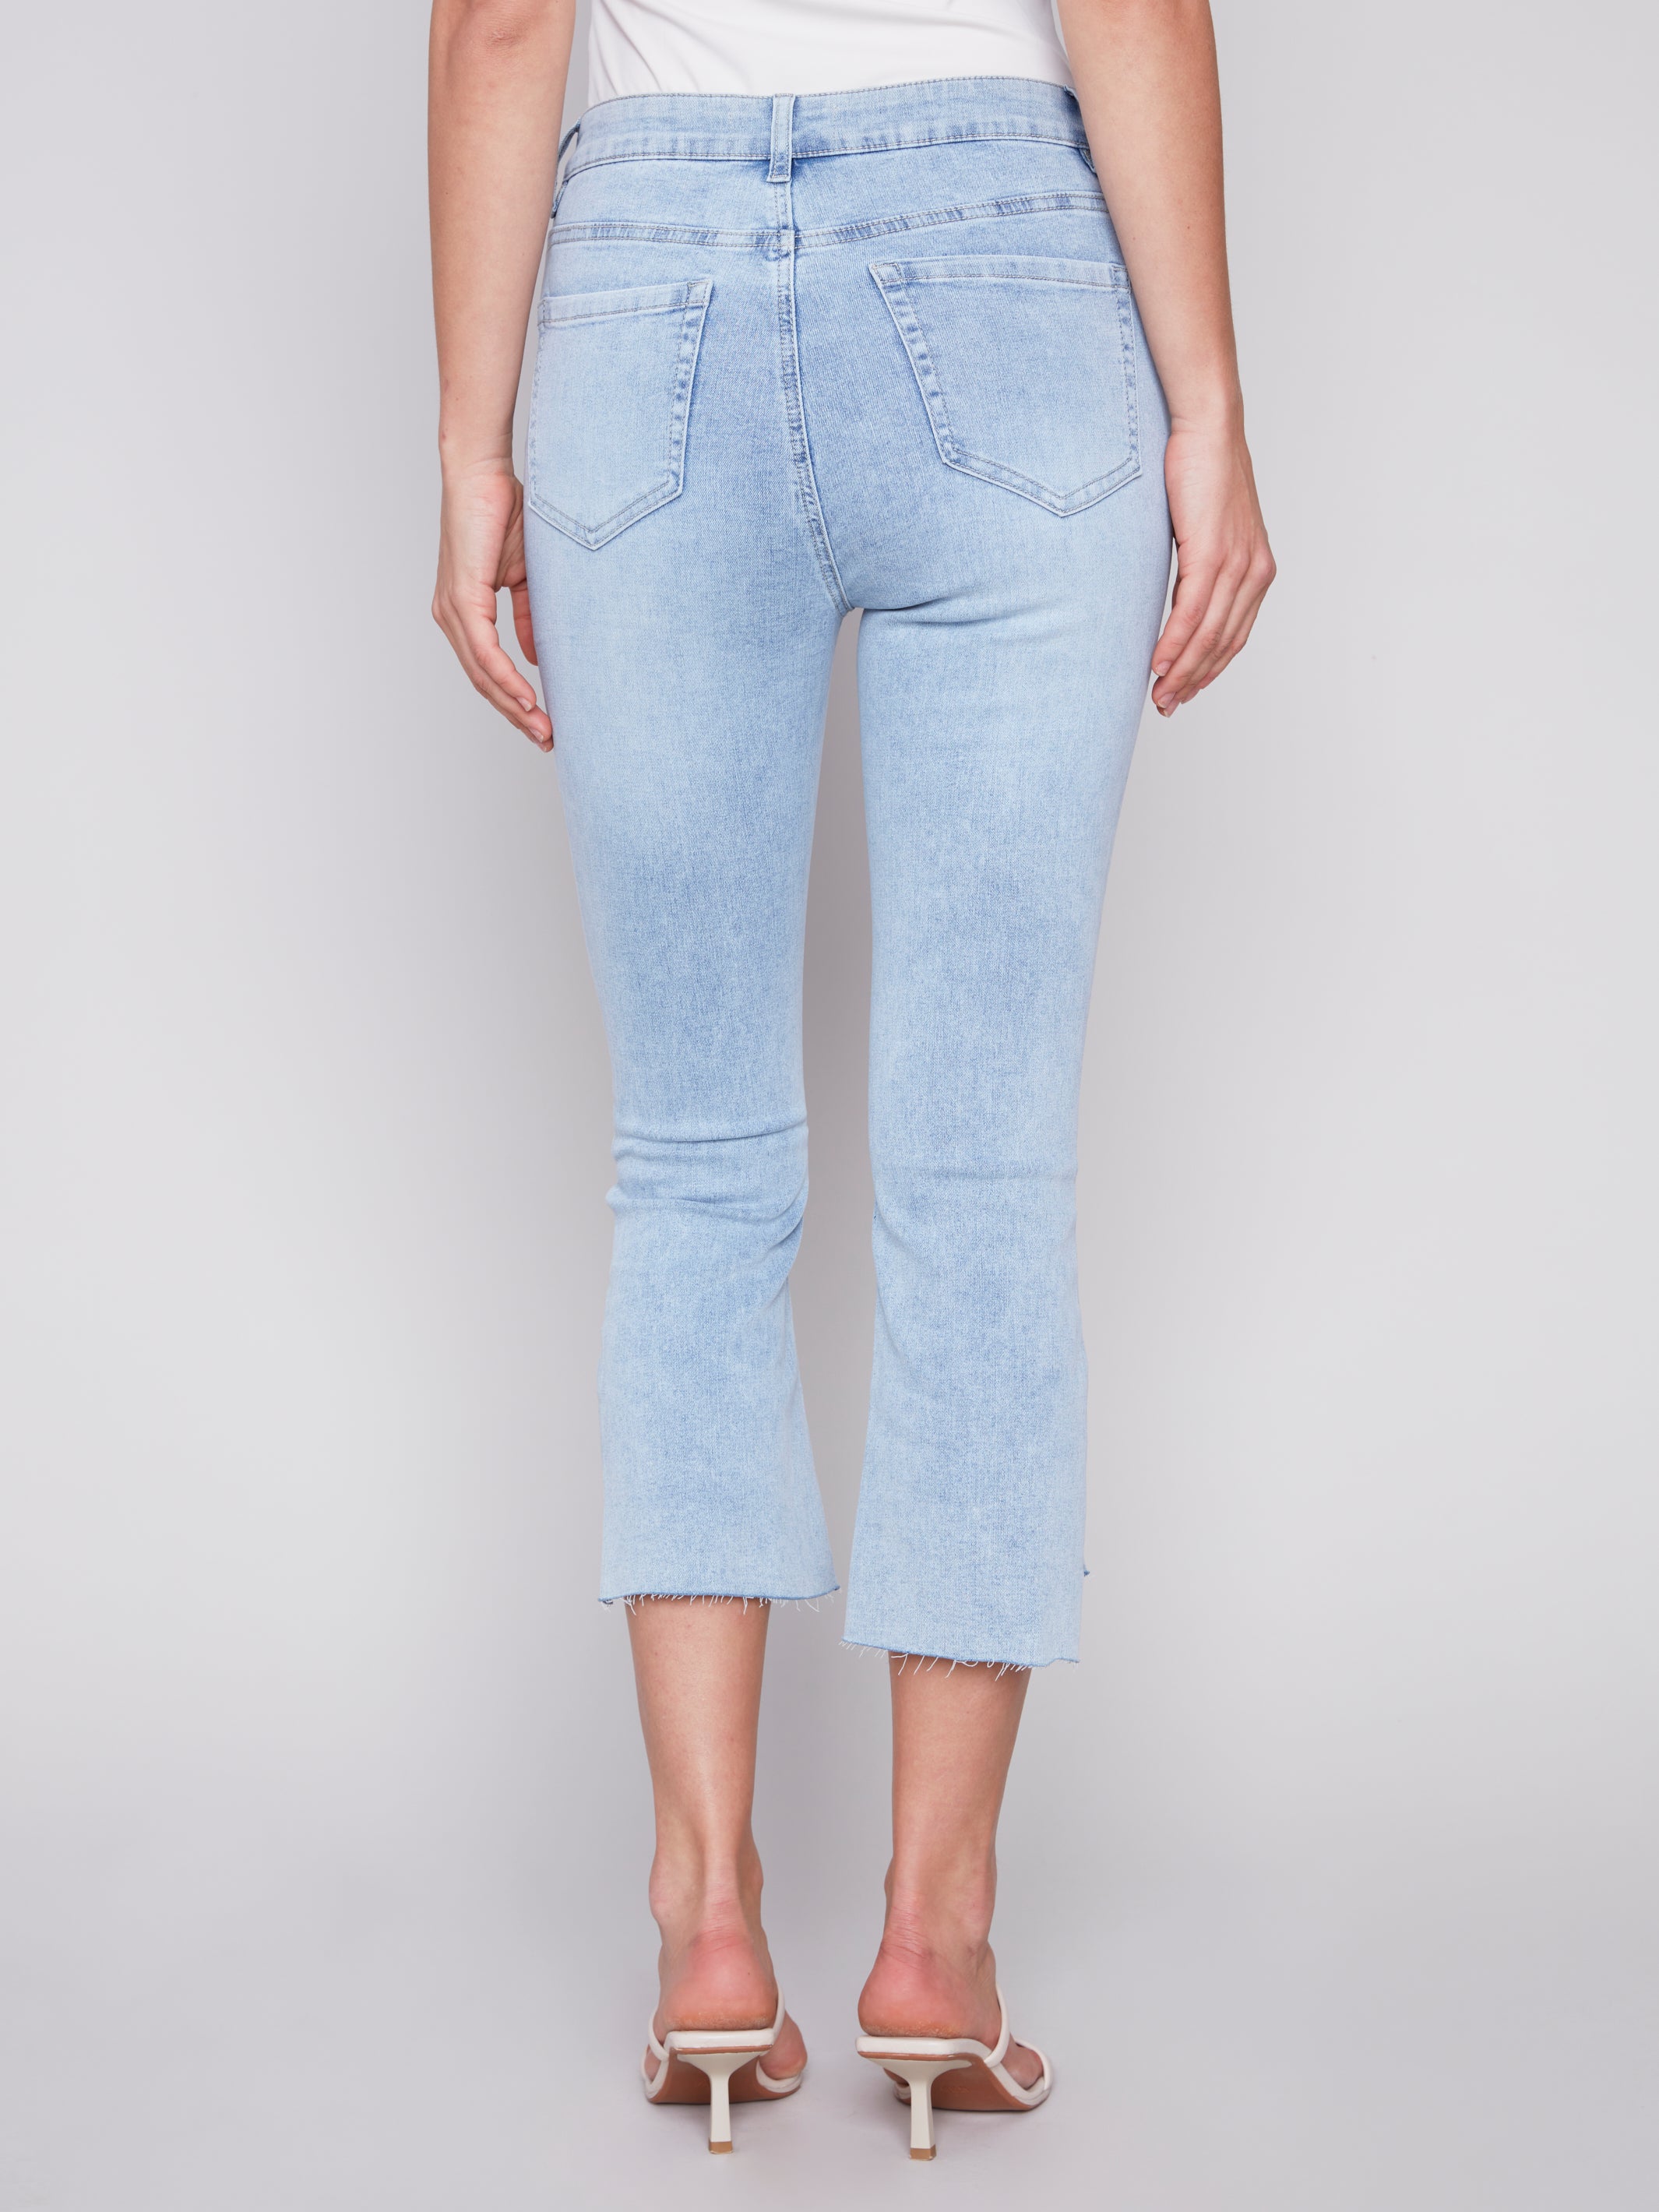 Cropped Kick Flare Jeans with Asymmetrical Hem by Charlie B